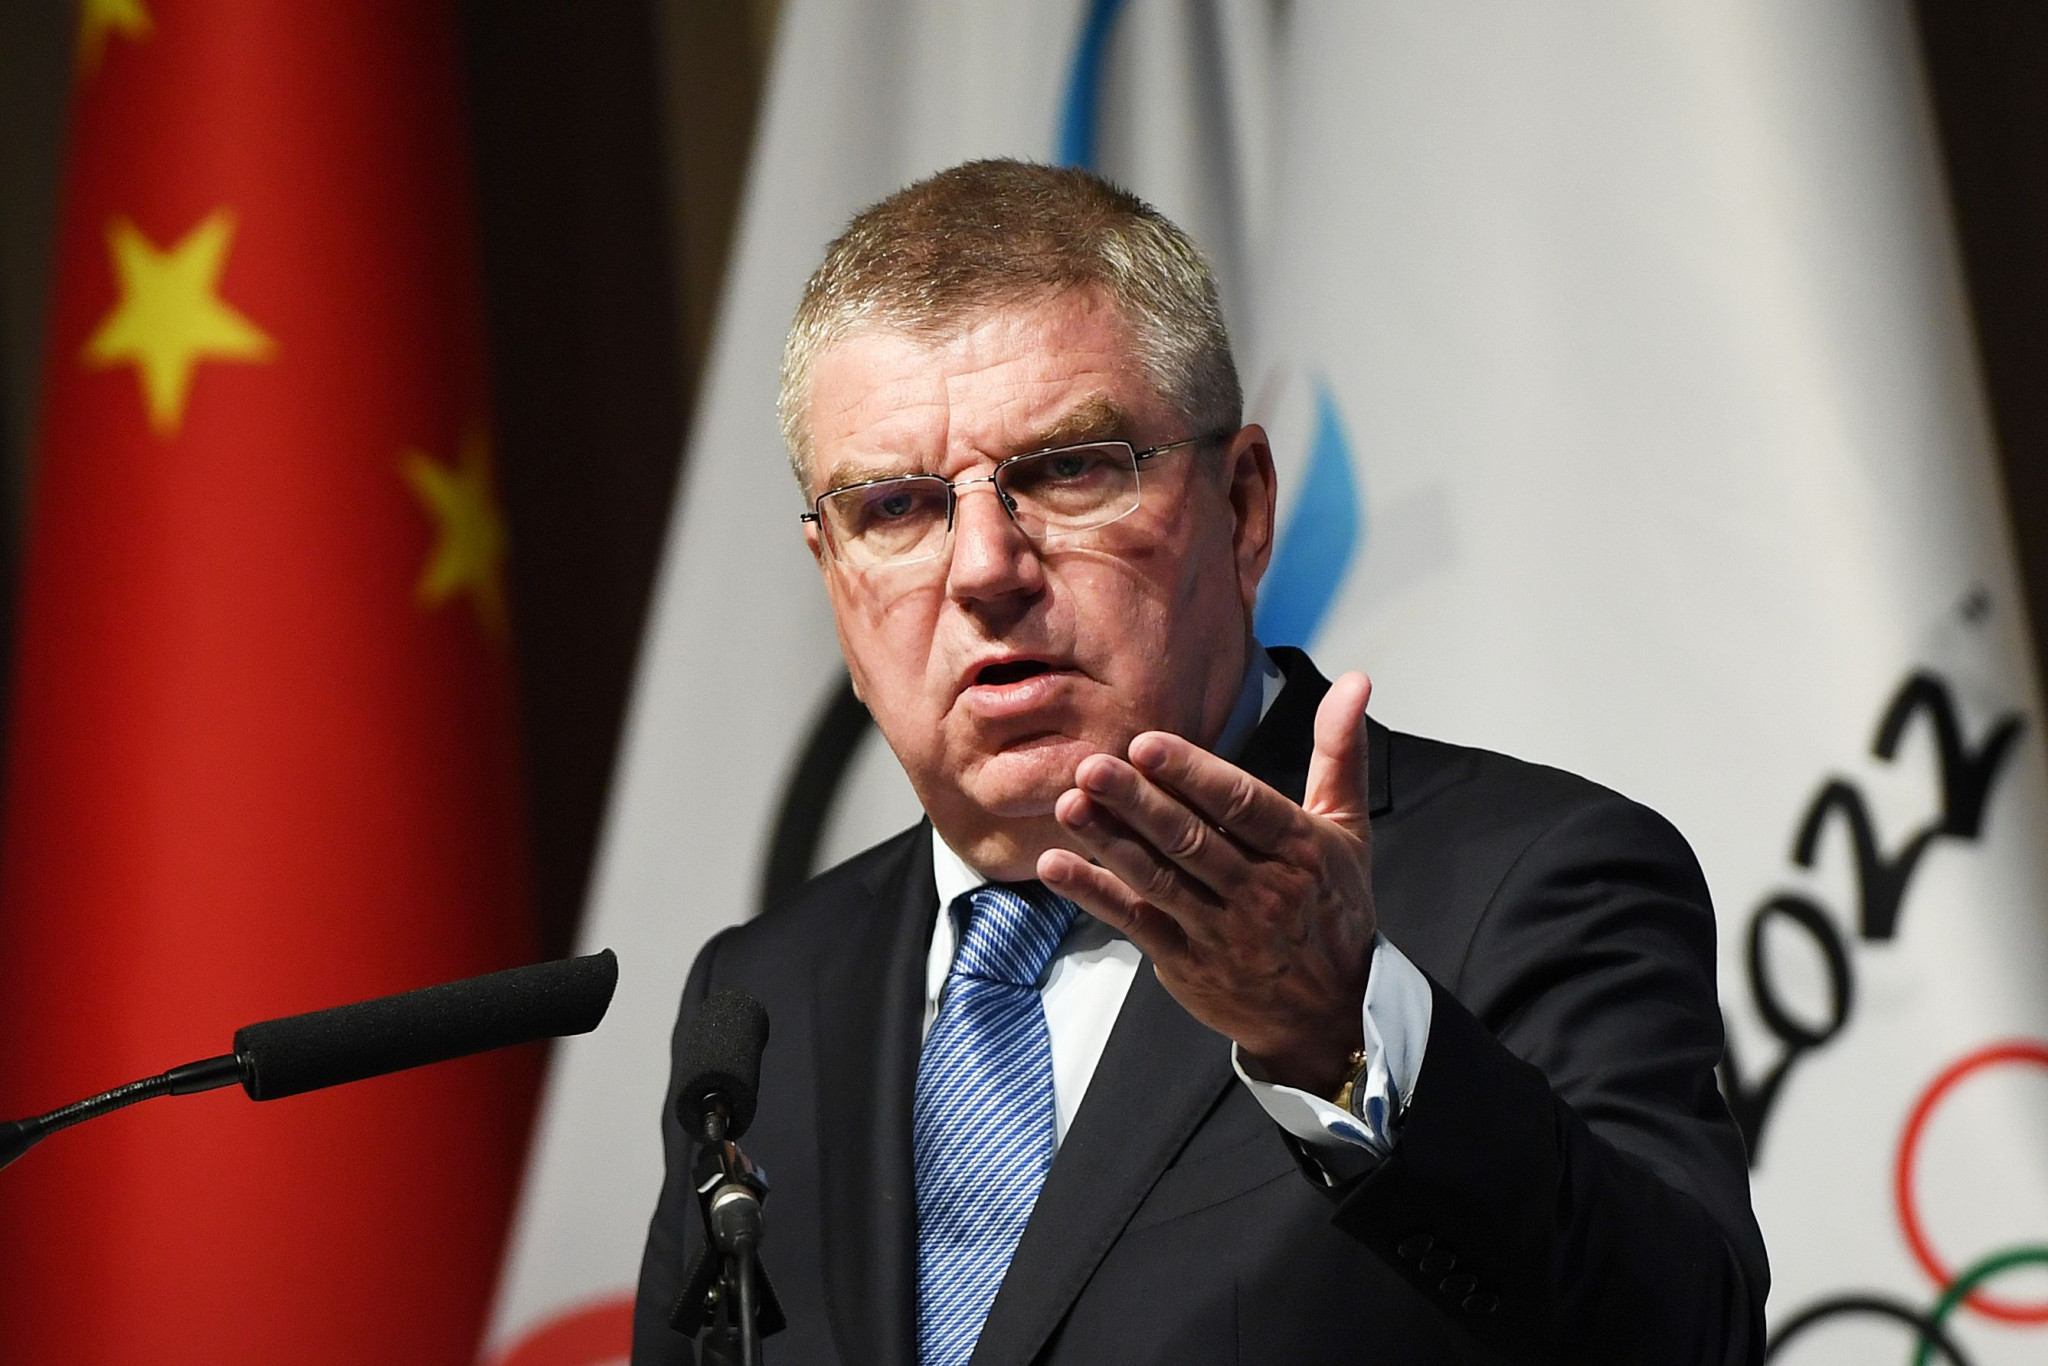 IOC President Thomas Bach is in Beijing for the official de-brief of the Pyeongchang 2018 Winter Olympic and Paralympic Games ©Getty Images